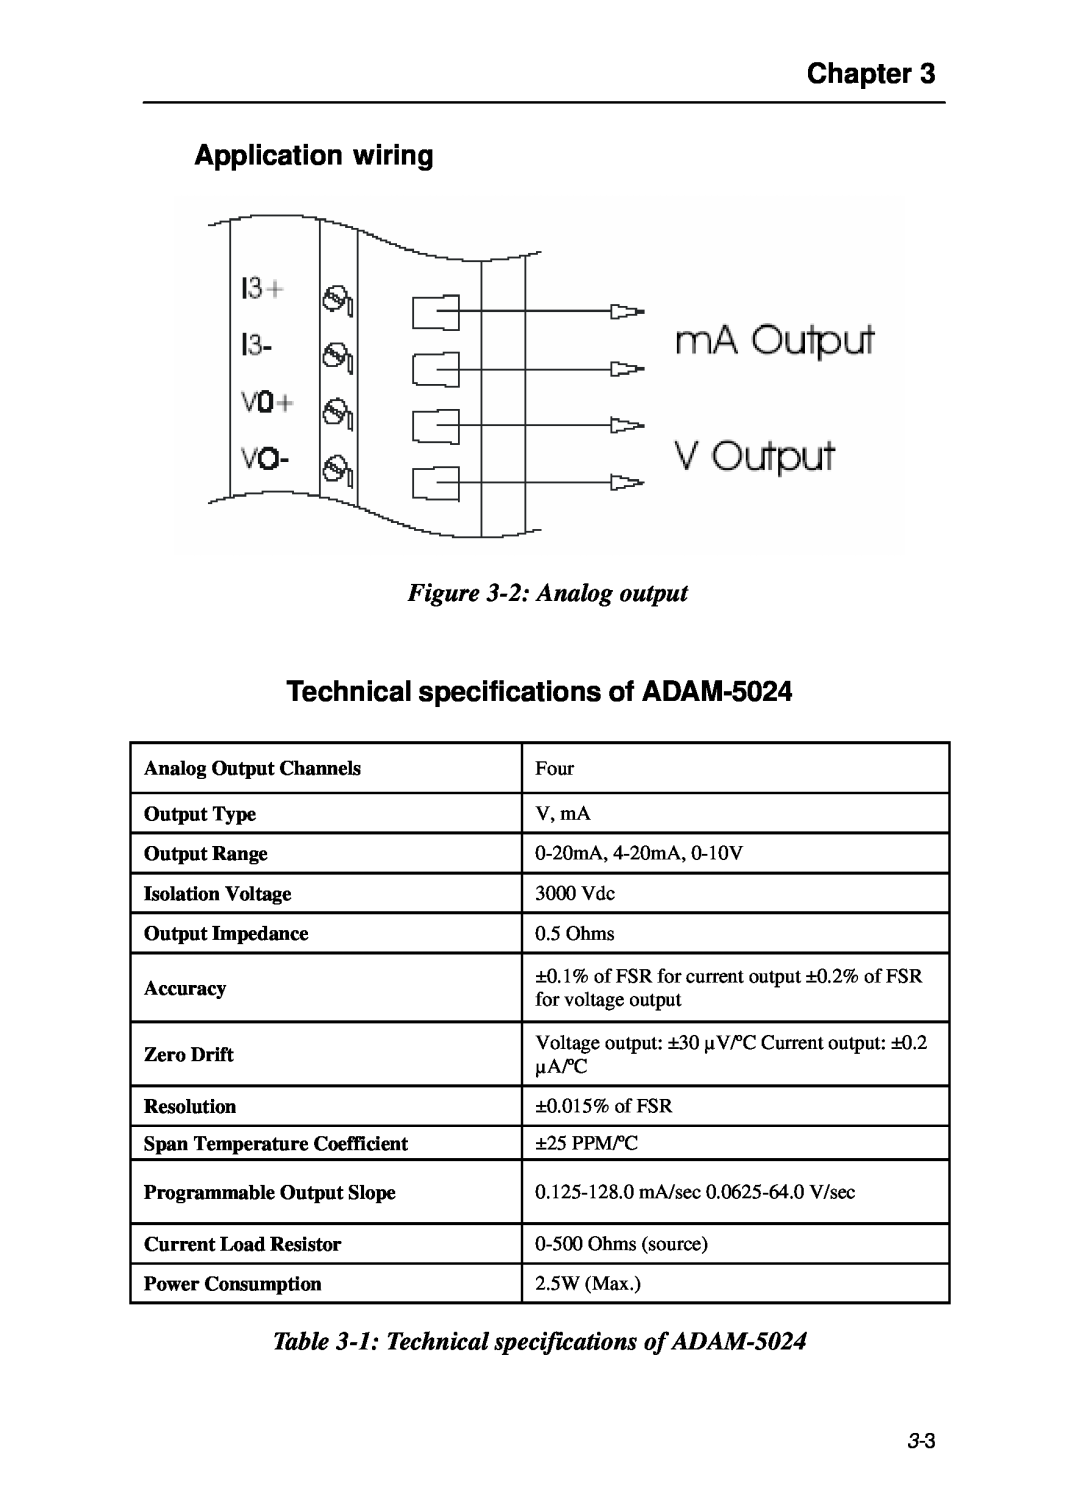 B&B Electronics 5000 Series user manual Technical specifications of ADAM-5024, 2 Analog output, Chapter Application wiring 